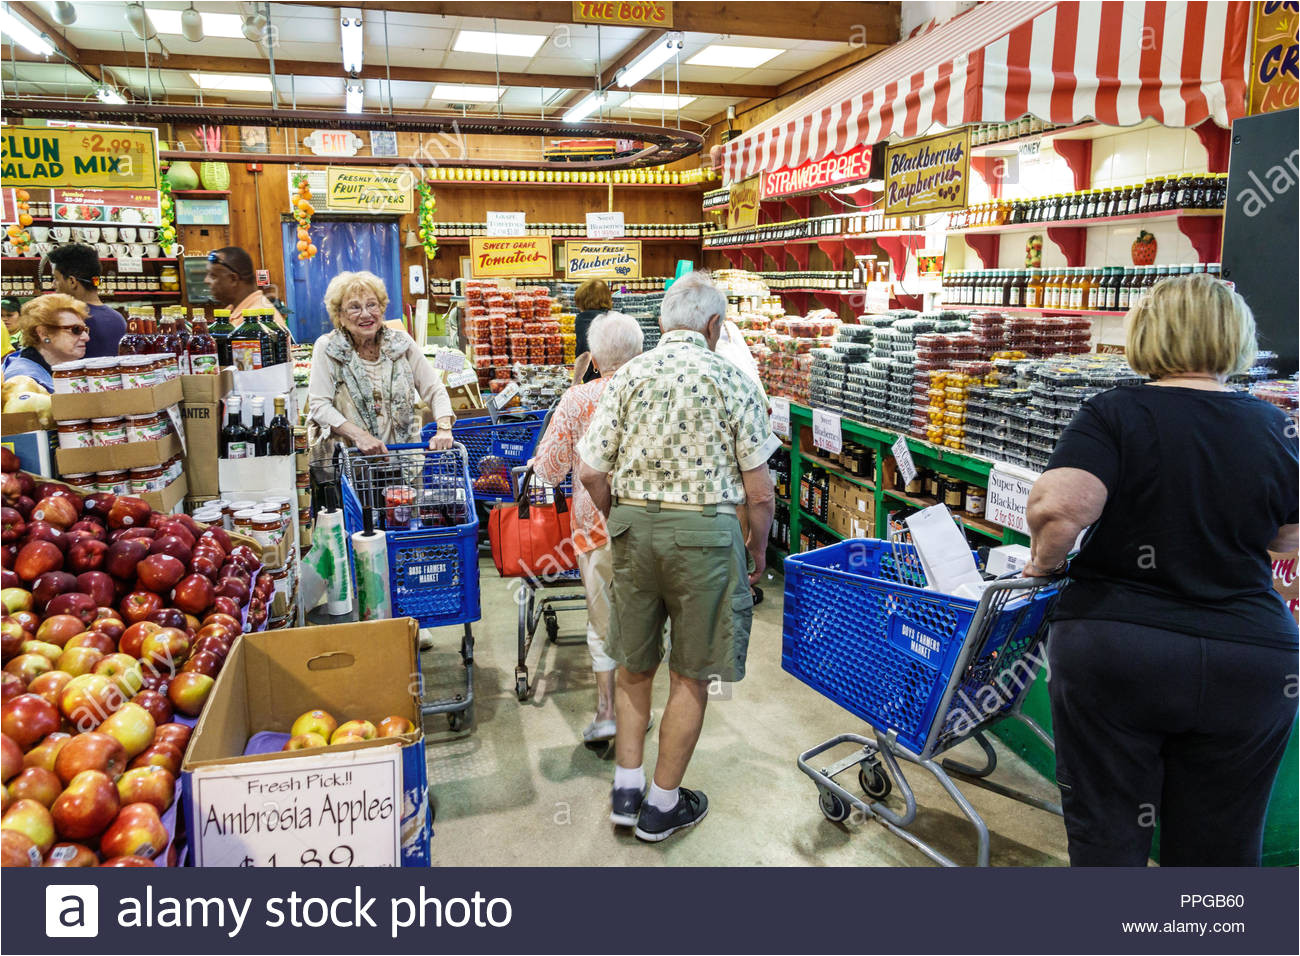 Superstore Click and Collect How Does It Work Grocery Groceries Store Stock Photos Grocery Groceries Store Stock